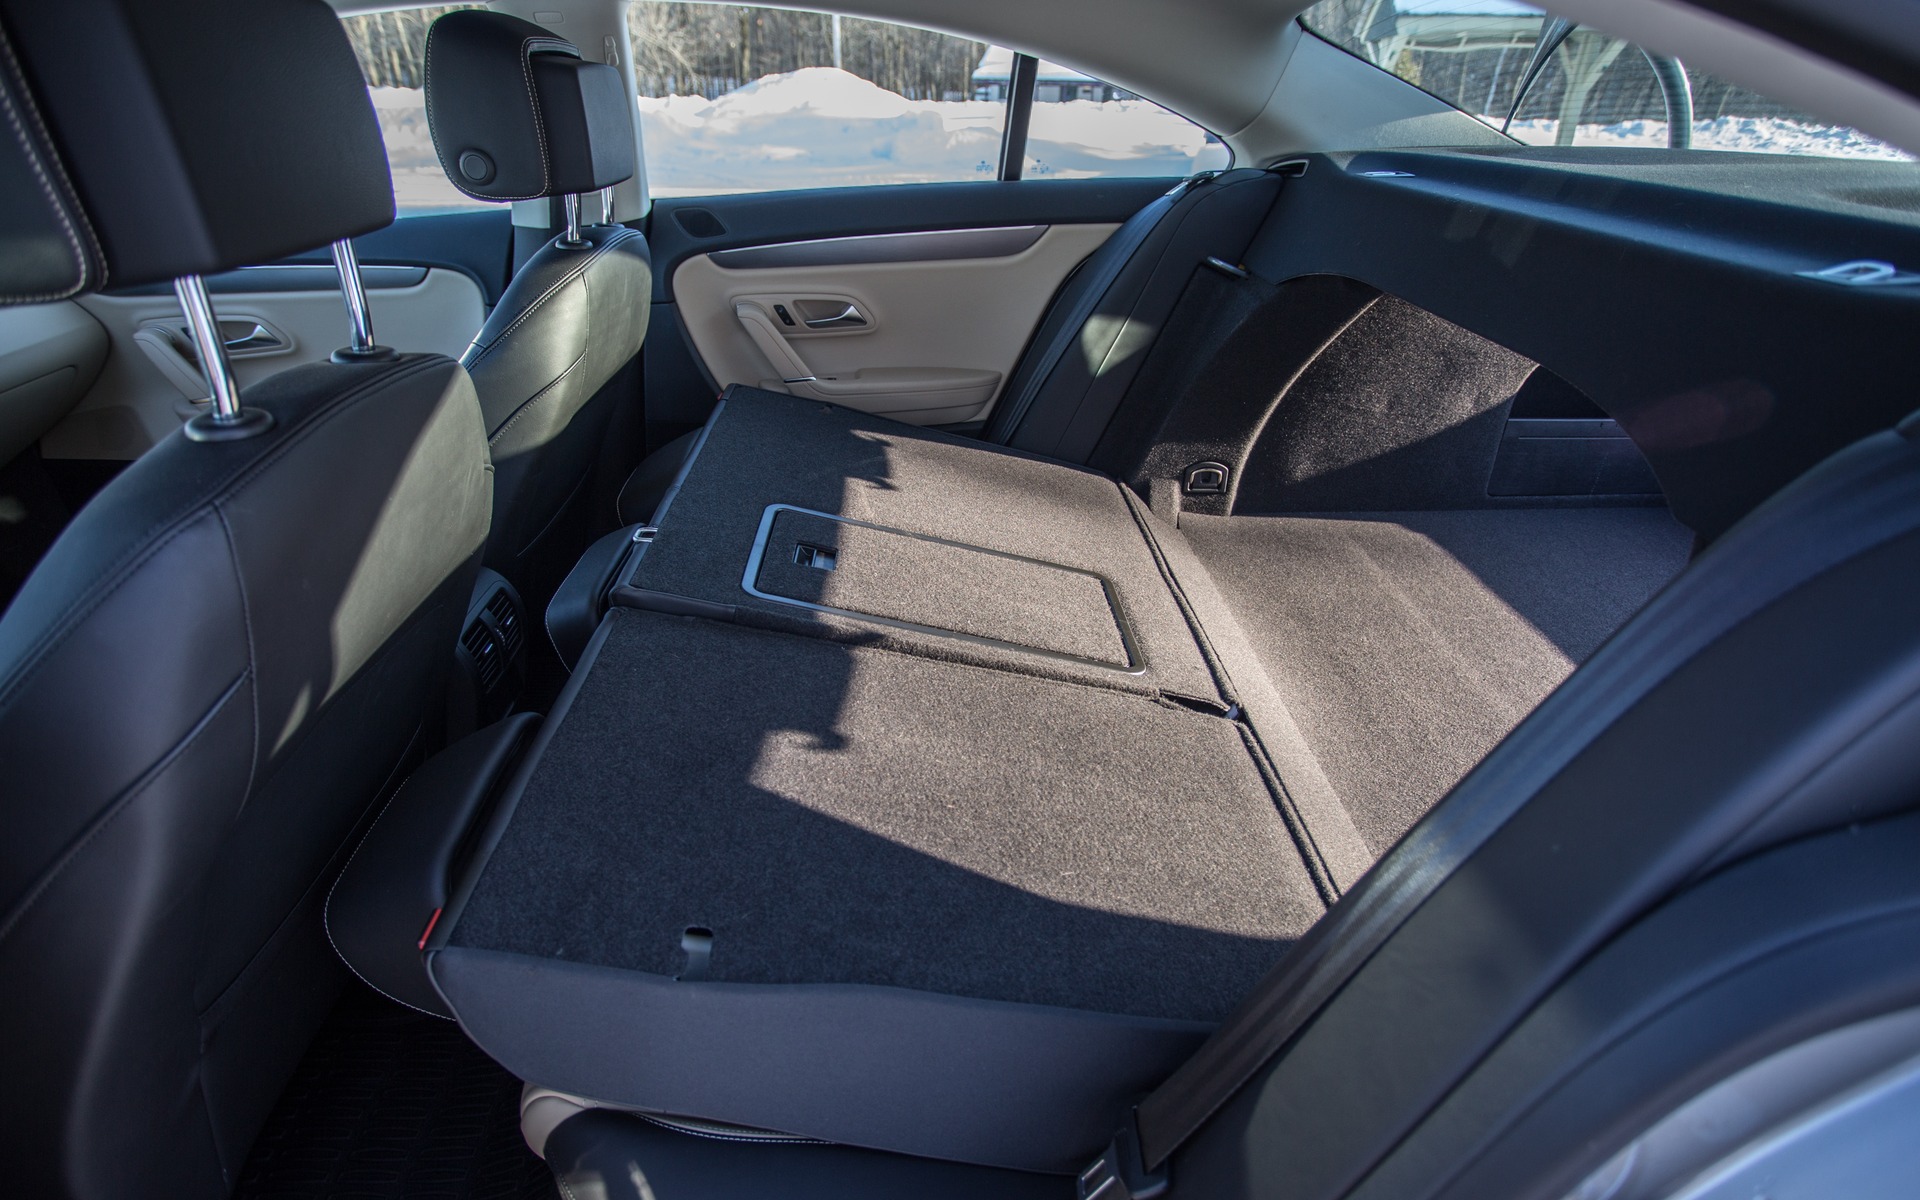 Cargo space is aided and abetted by a fold-down rear seat.